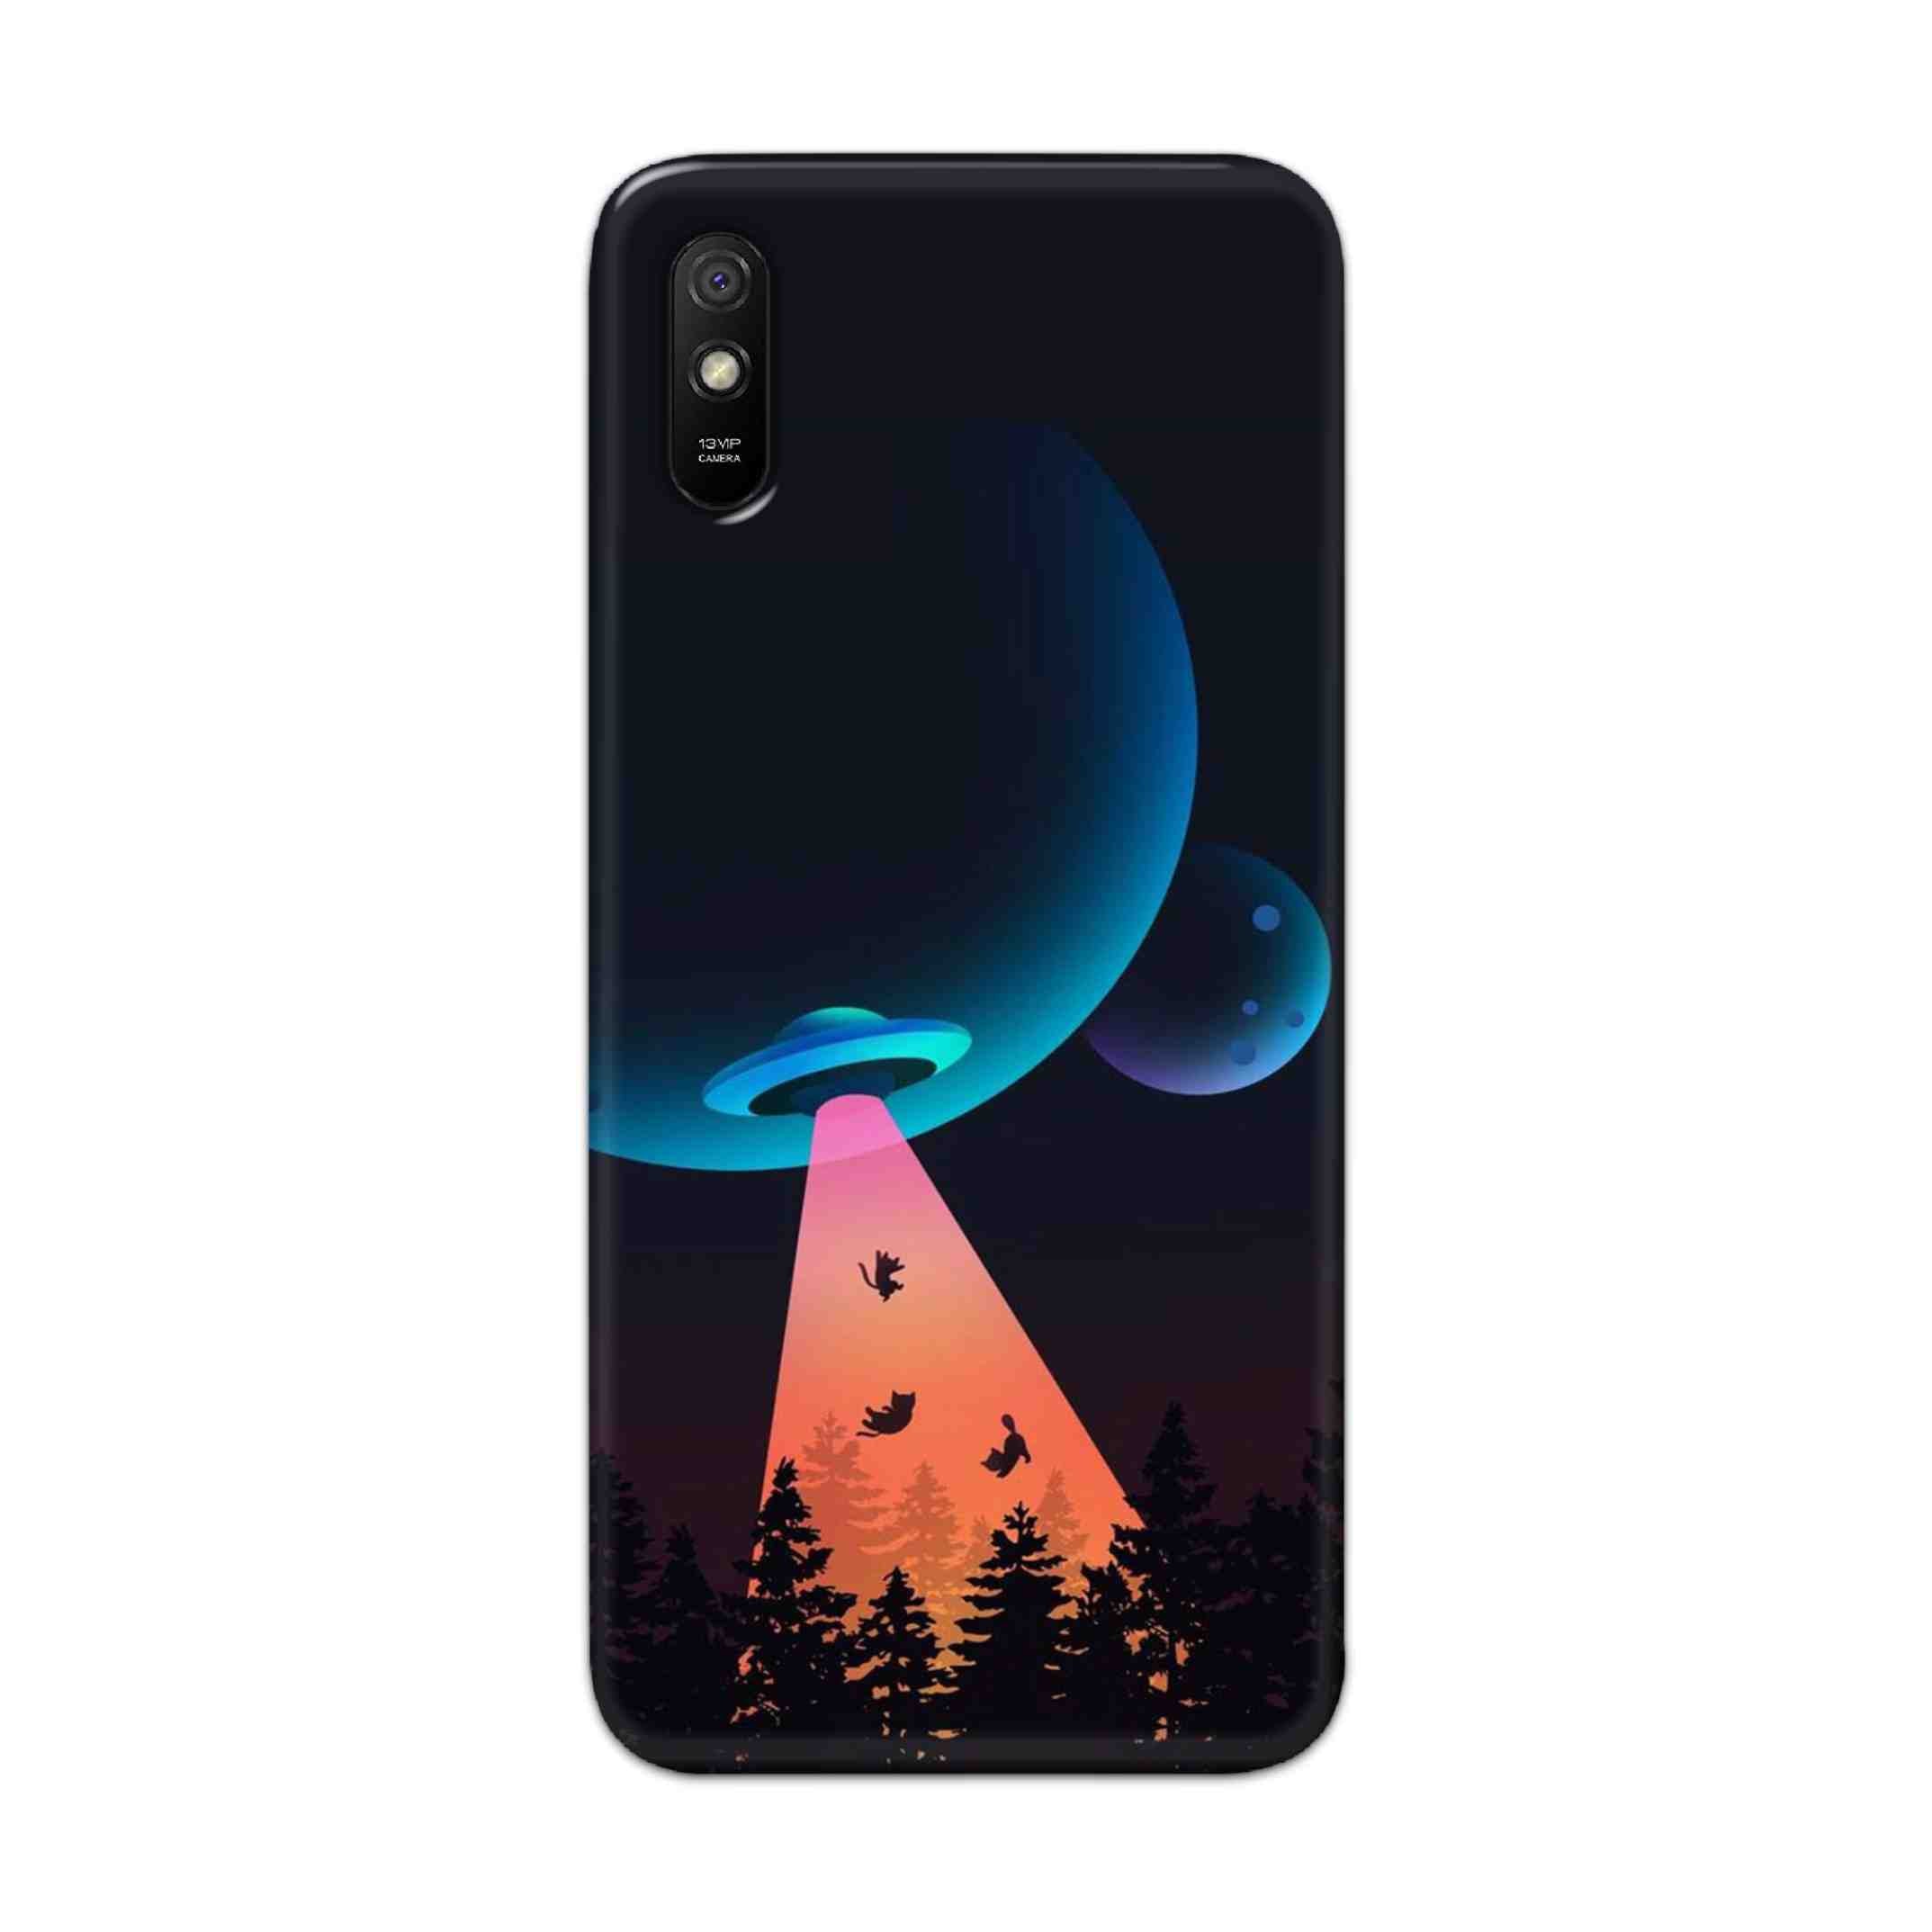 Buy Spaceship Hard Back Mobile Phone Case Cover For Redmi 9A Online